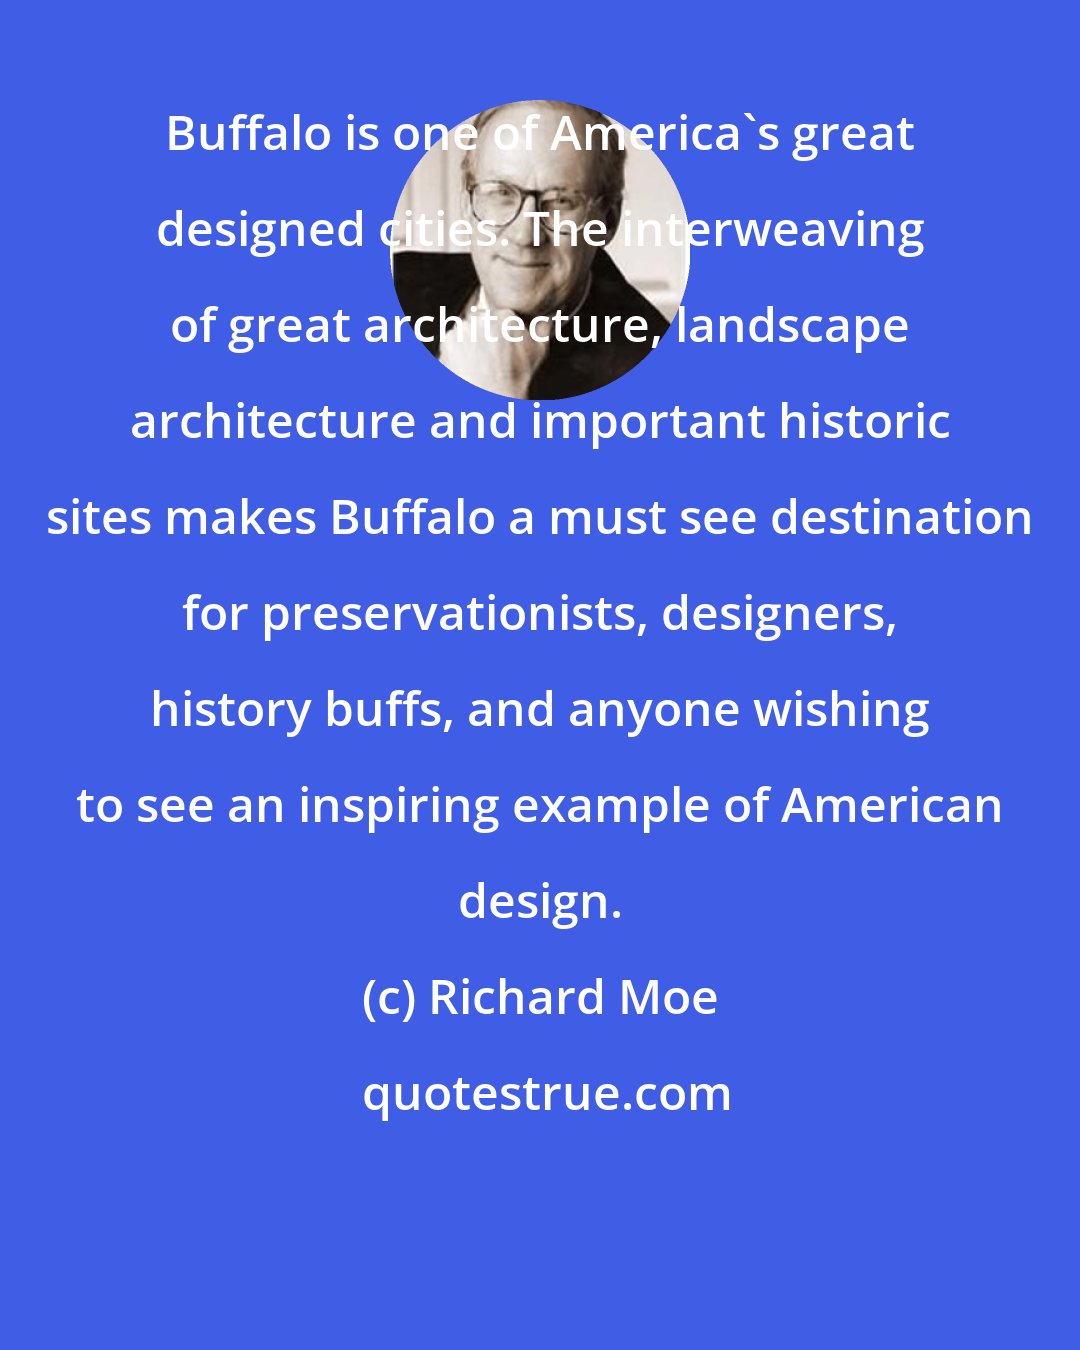 Richard Moe: Buffalo is one of America's great designed cities. The interweaving of great architecture, landscape architecture and important historic sites makes Buffalo a must see destination for preservationists, designers, history buffs, and anyone wishing to see an inspiring example of American design.